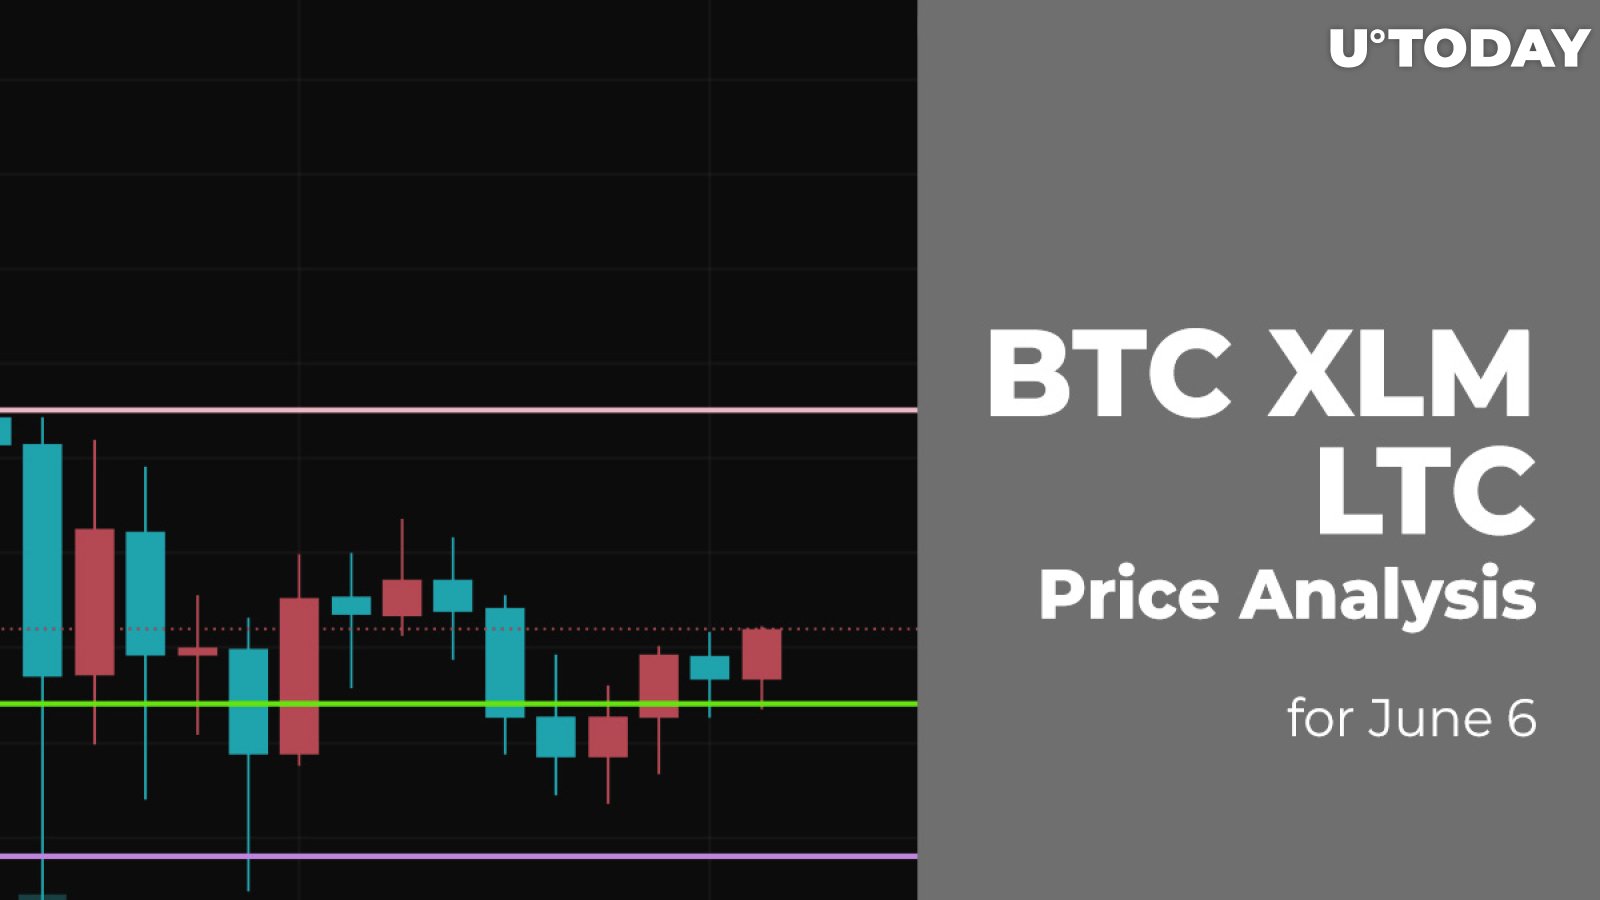 BTC, XLM and LTC Price Analysis for June 6